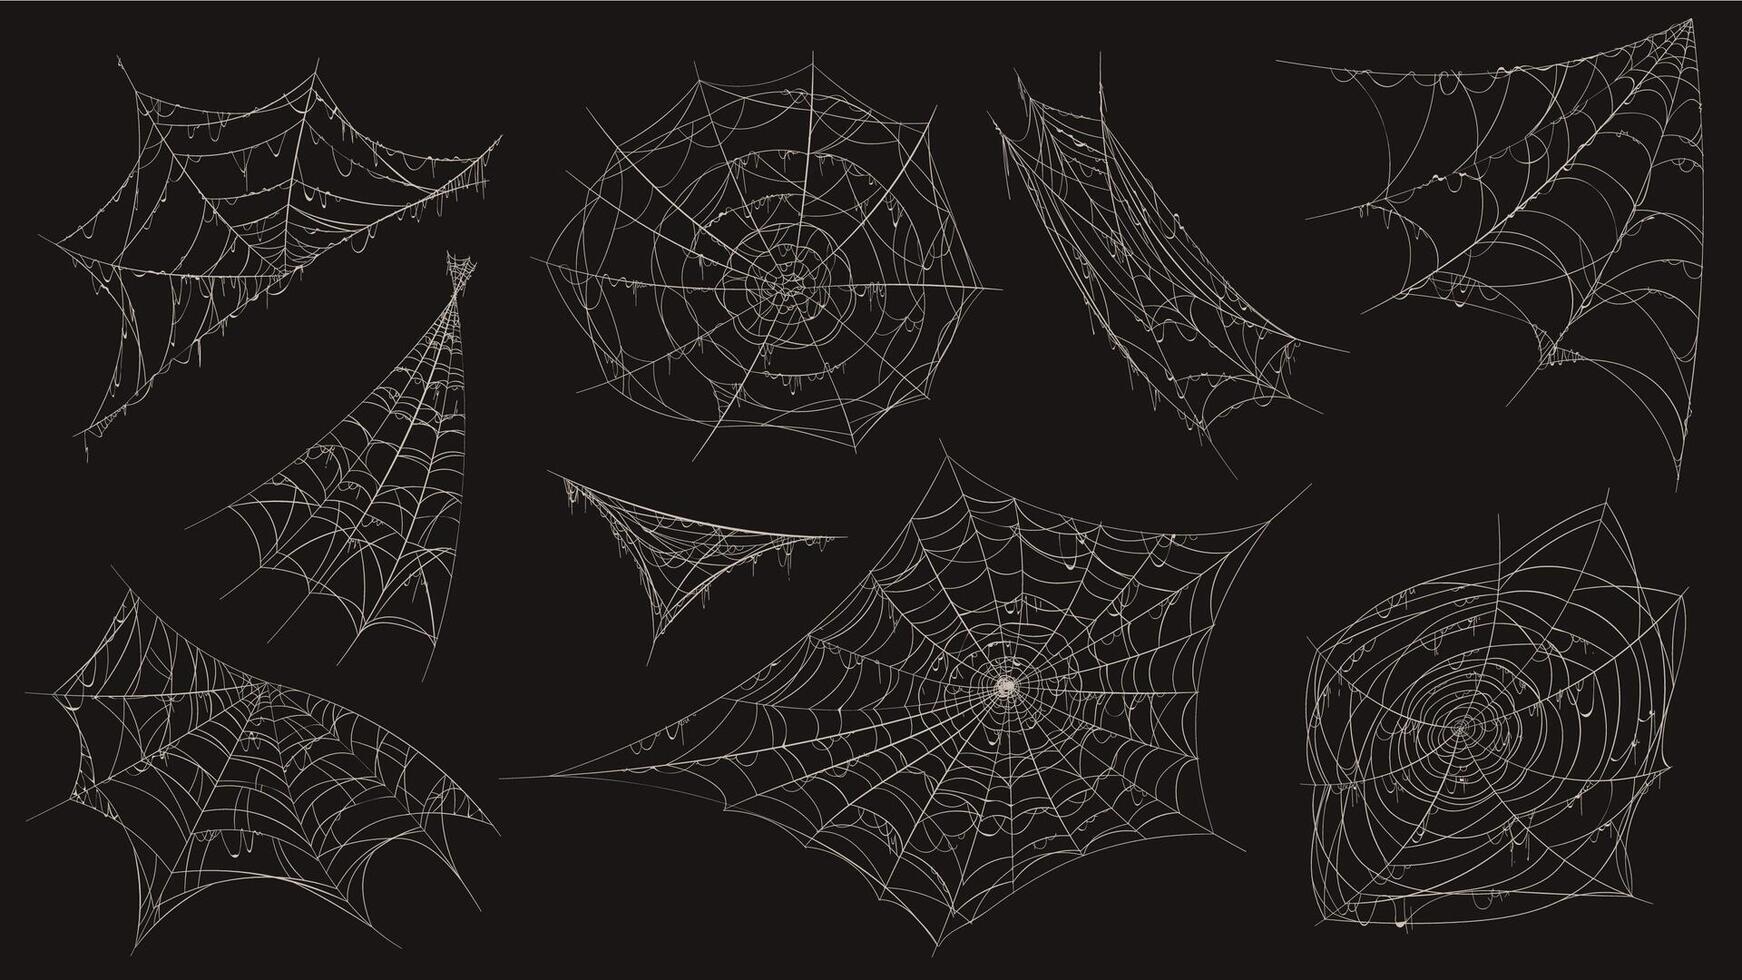 Spider web. Halloween cobweb spooky decoration. Corner with old dusty spiderweb hanging. Creepy decor spiders white sticky trap vector set